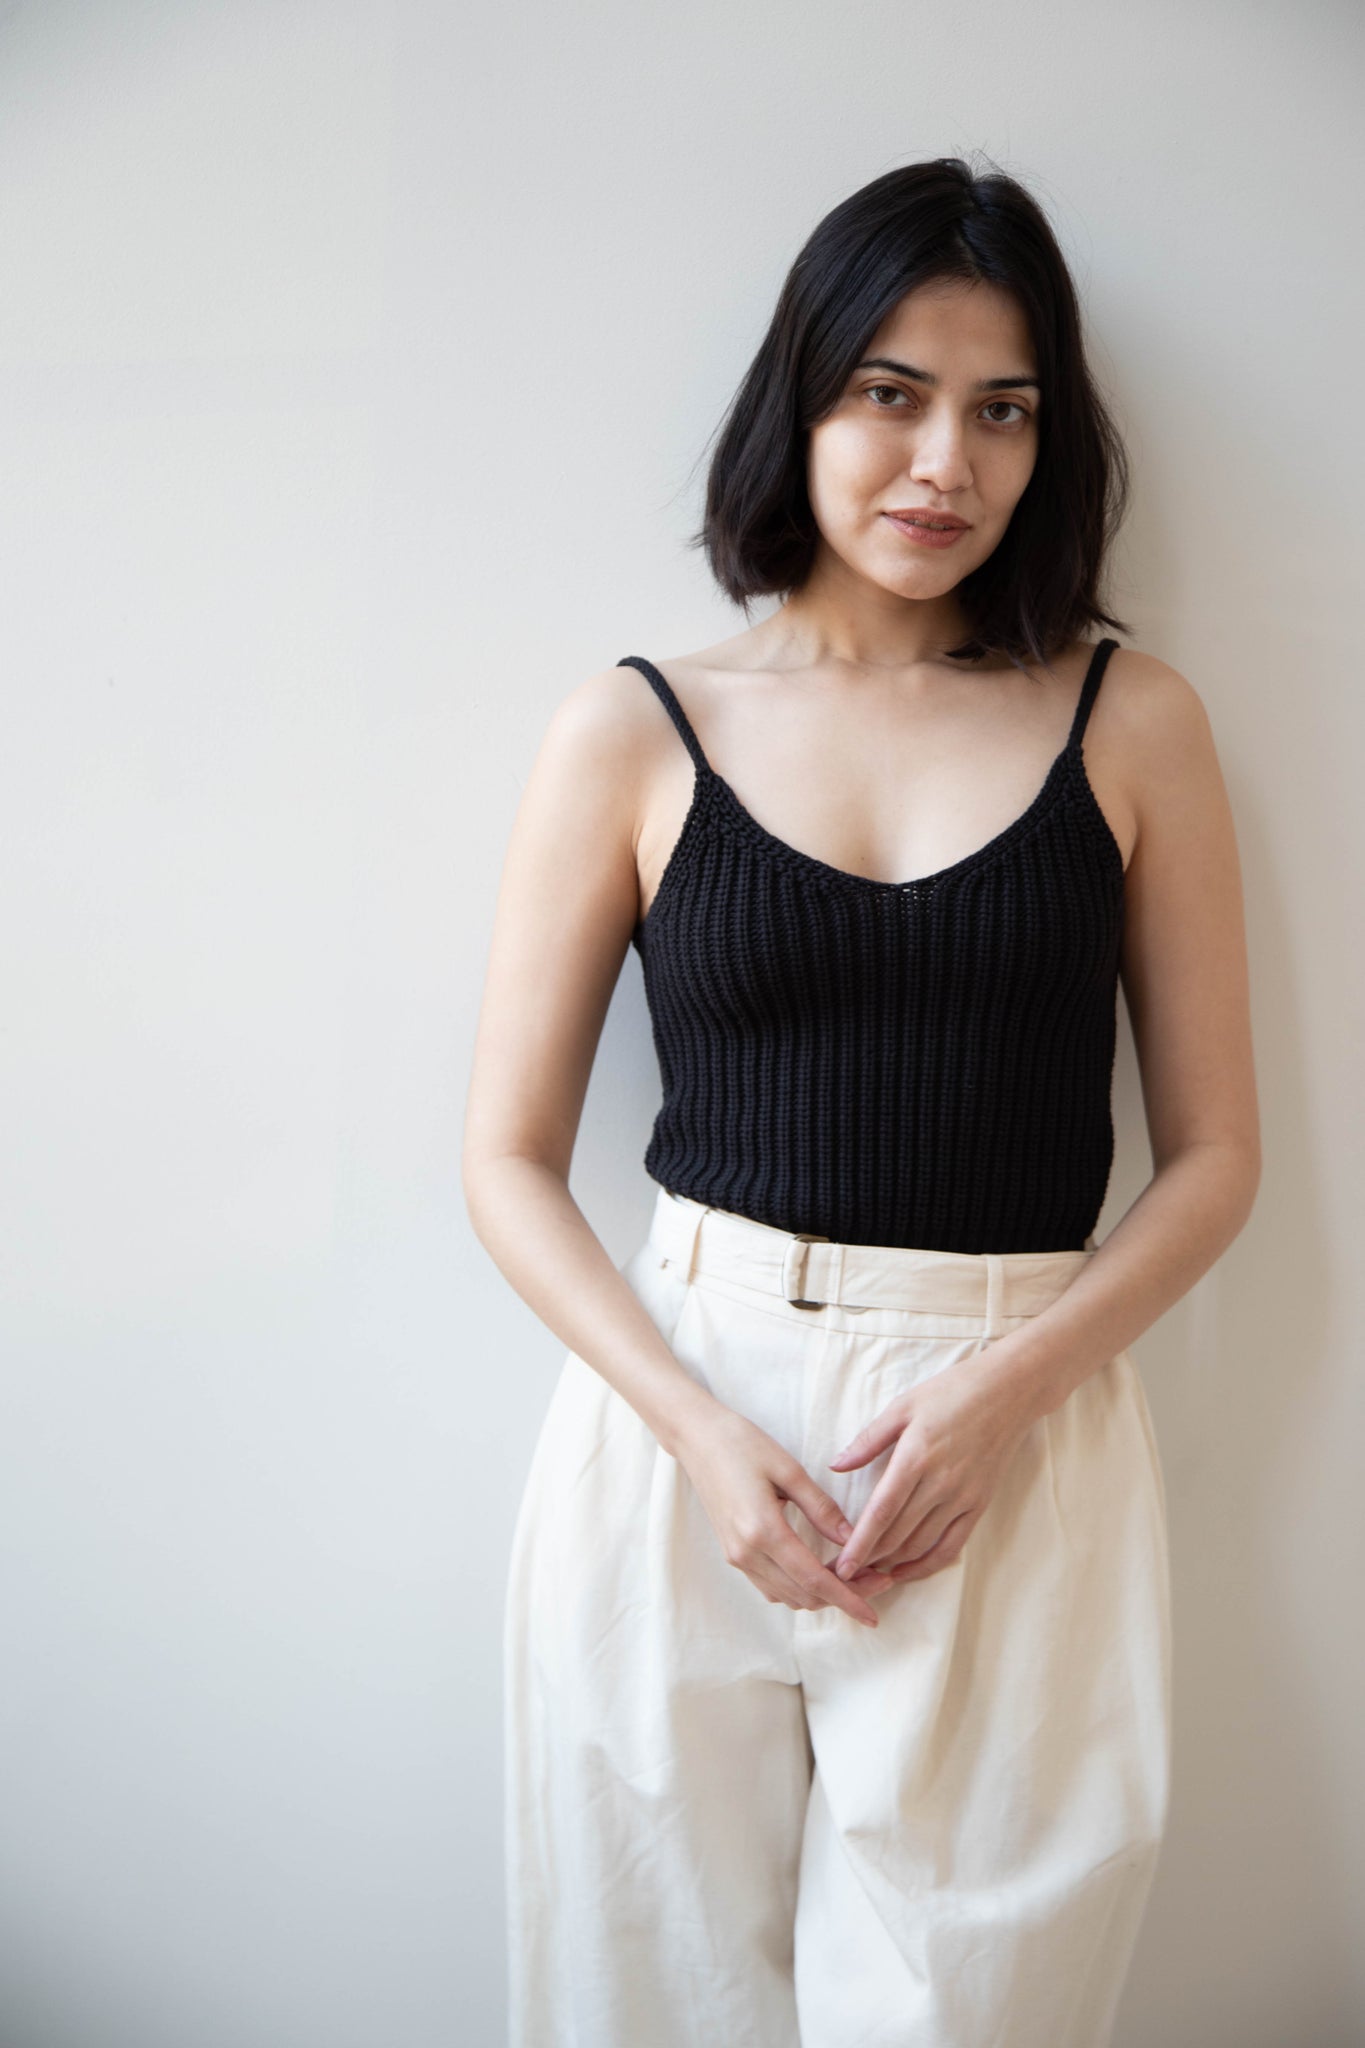 Nothing Written | Jerry Knit Cami in Black